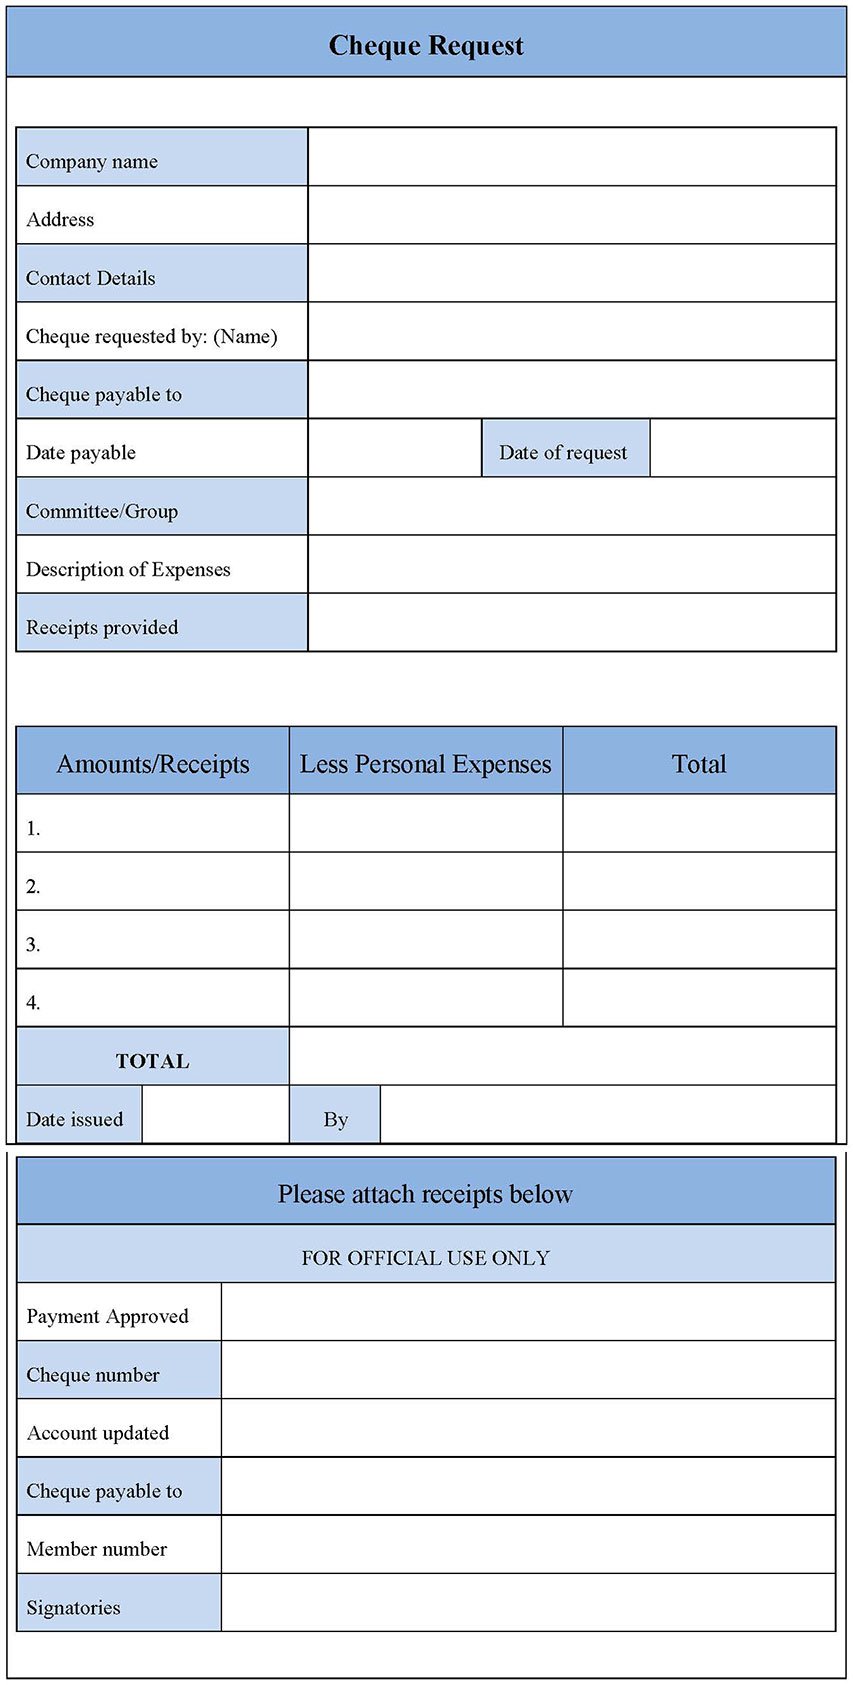 Cheque Request Form